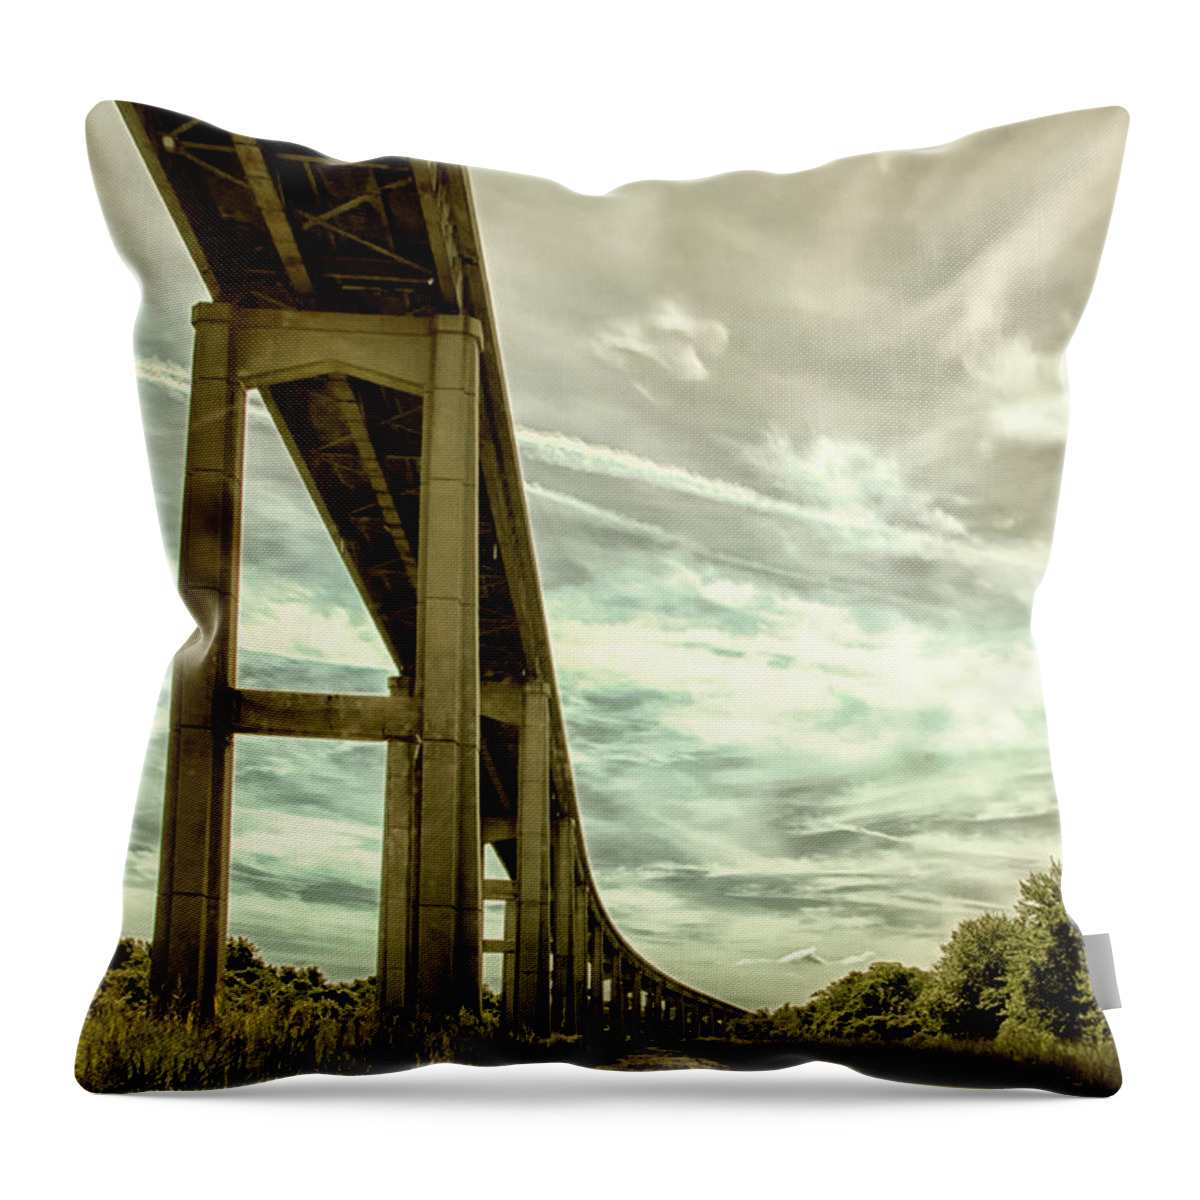 Rural Throw Pillow featuring the photograph Reedy Point Bridge Against Sky Abstract Rural Landscape Photograph by PIPA Fine Art - Simply Solid